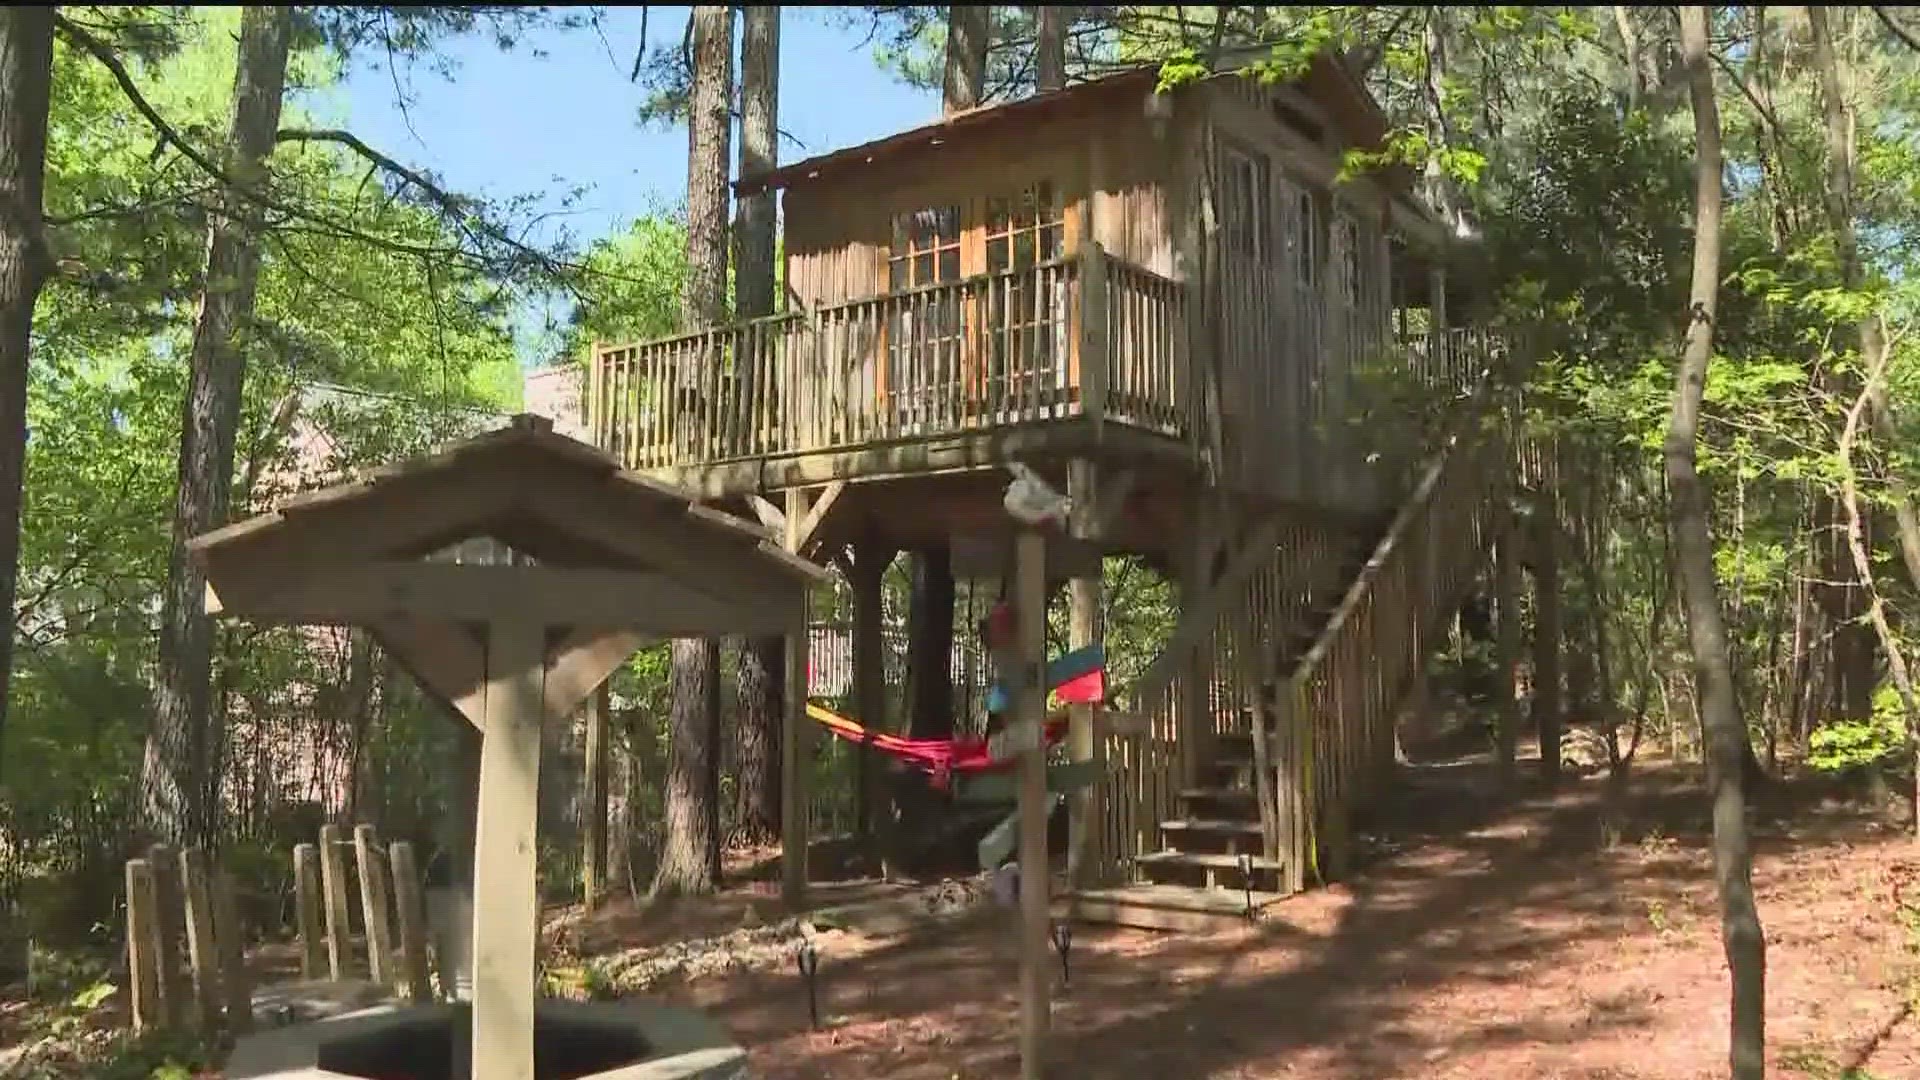 Ryan McGovern, a former Marine and police officer, and his family own the Treasure Hunt Treehouse rental. After the city's decision, they are considering bankruptcy.